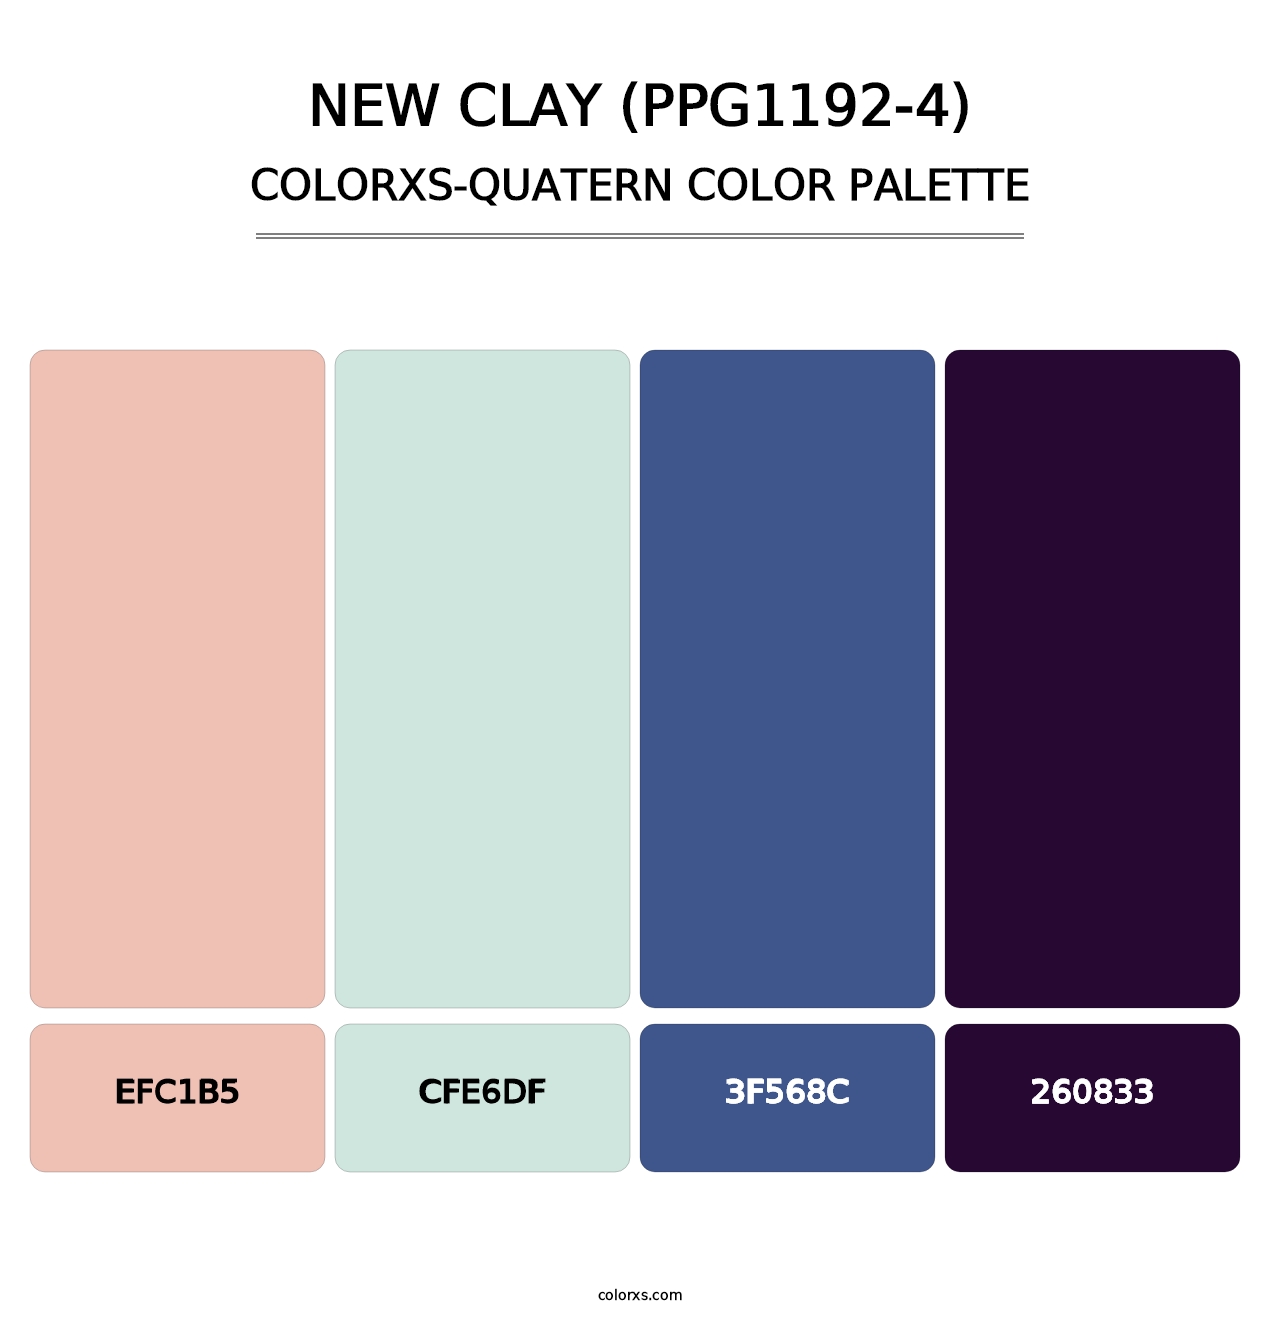 New Clay (PPG1192-4) - Colorxs Quatern Palette